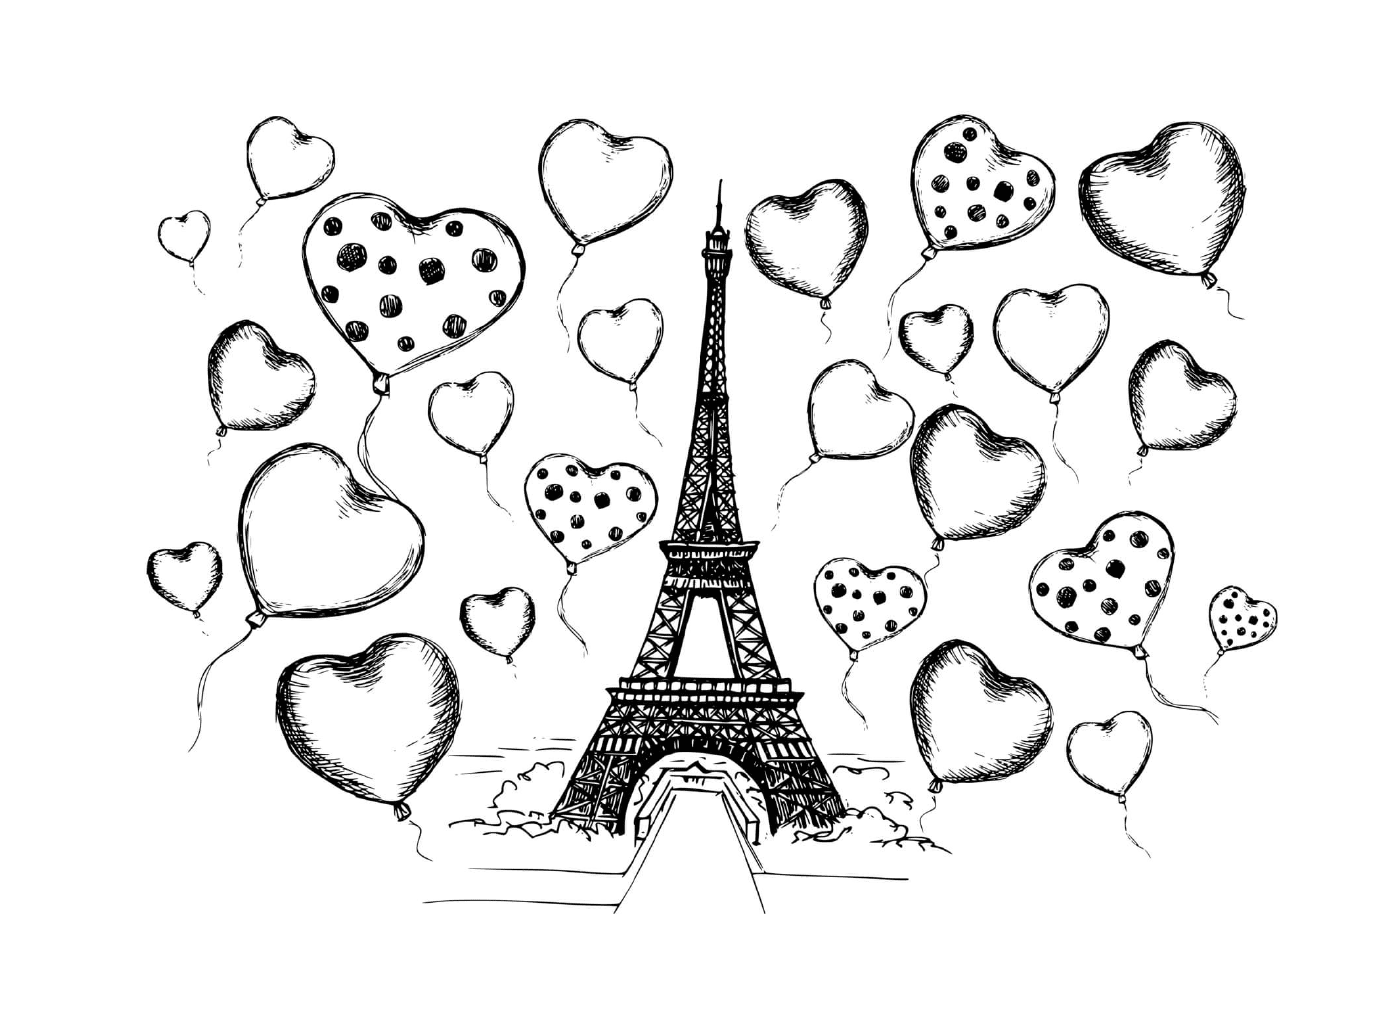  Eiffel Tower surrounded by hearts and balloons 